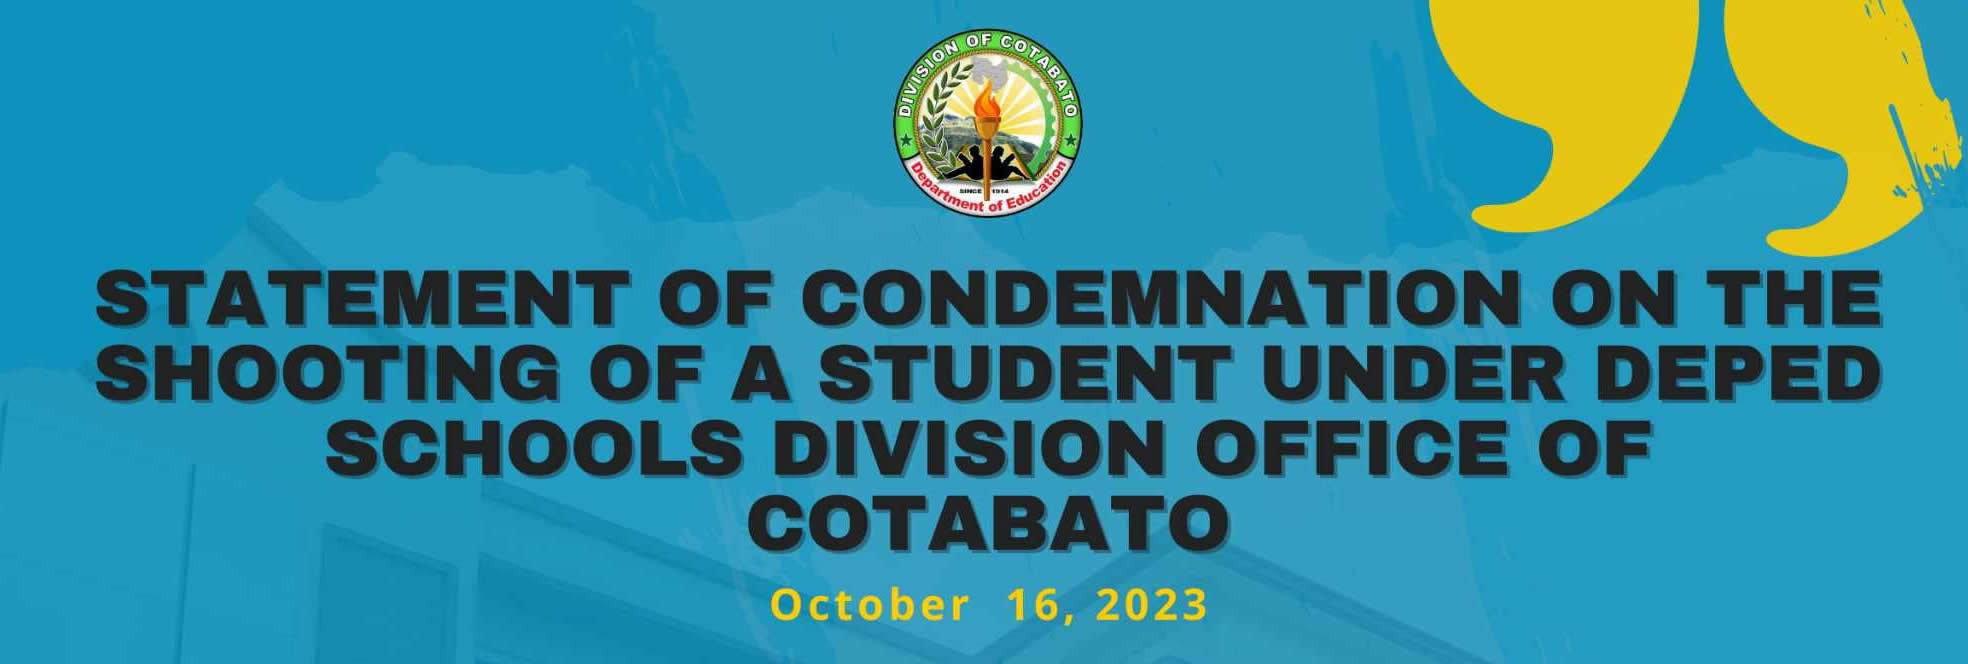 Statement of Condemnation on the Shooting of a Student Under Deped Schools Division Office of Cotabato